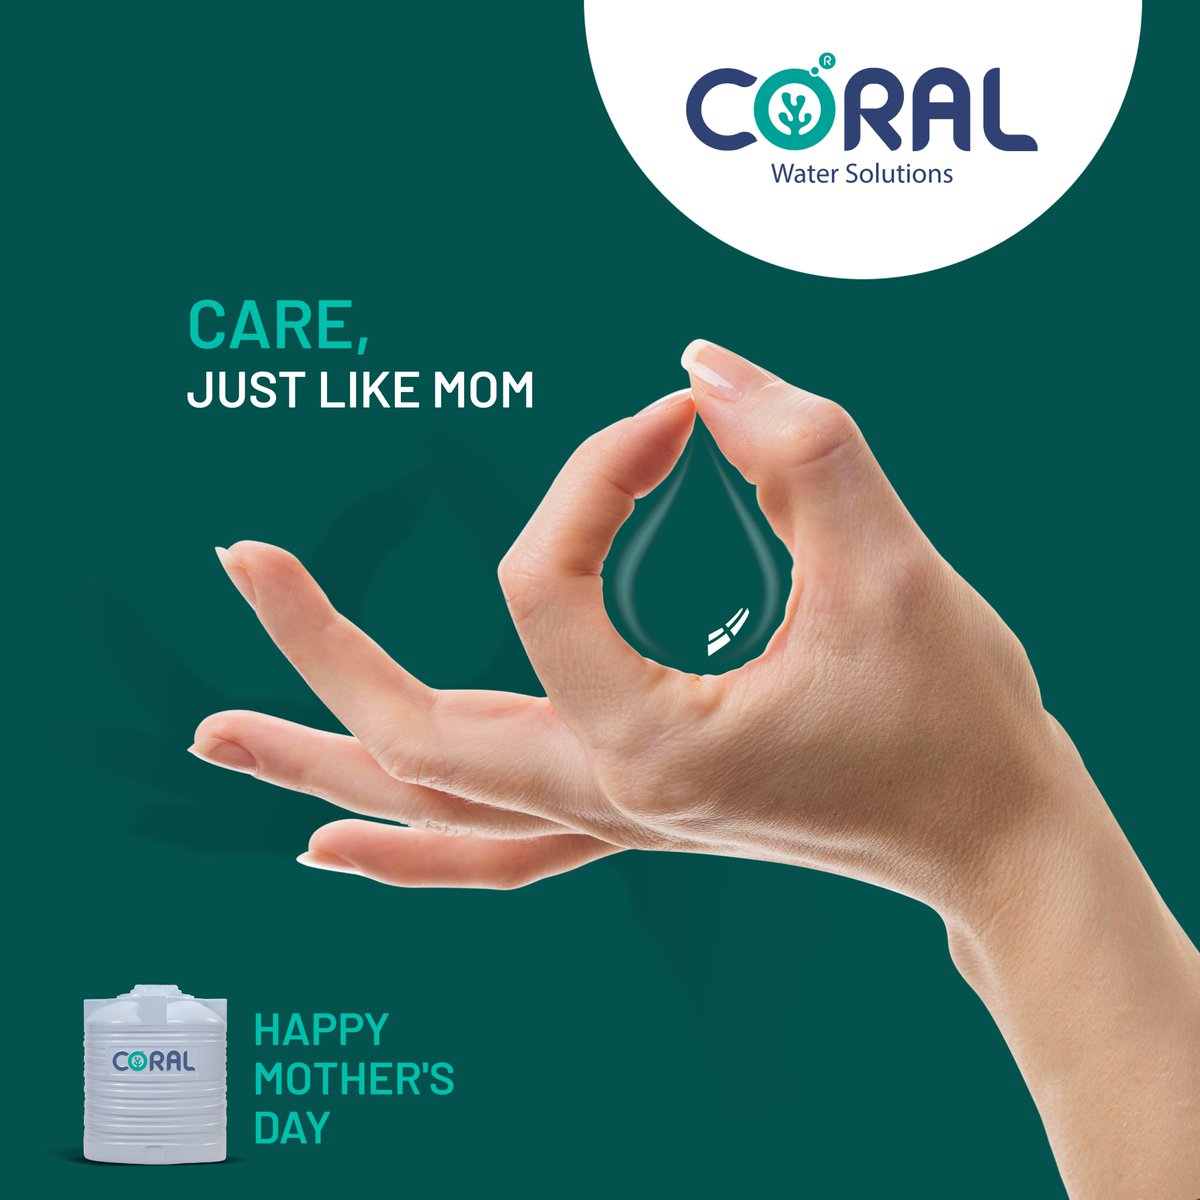 Discover motherly care in every ripple held by a Coral water tank. Wishing you a very happy #MothersDay.

#coralwatersolutions #waterstorage #hygienicwater #healthylife #waterstoragetank #waterstoragetanks #watertanks #watertank #mom #mothersday2024 #MotherOfTheBride